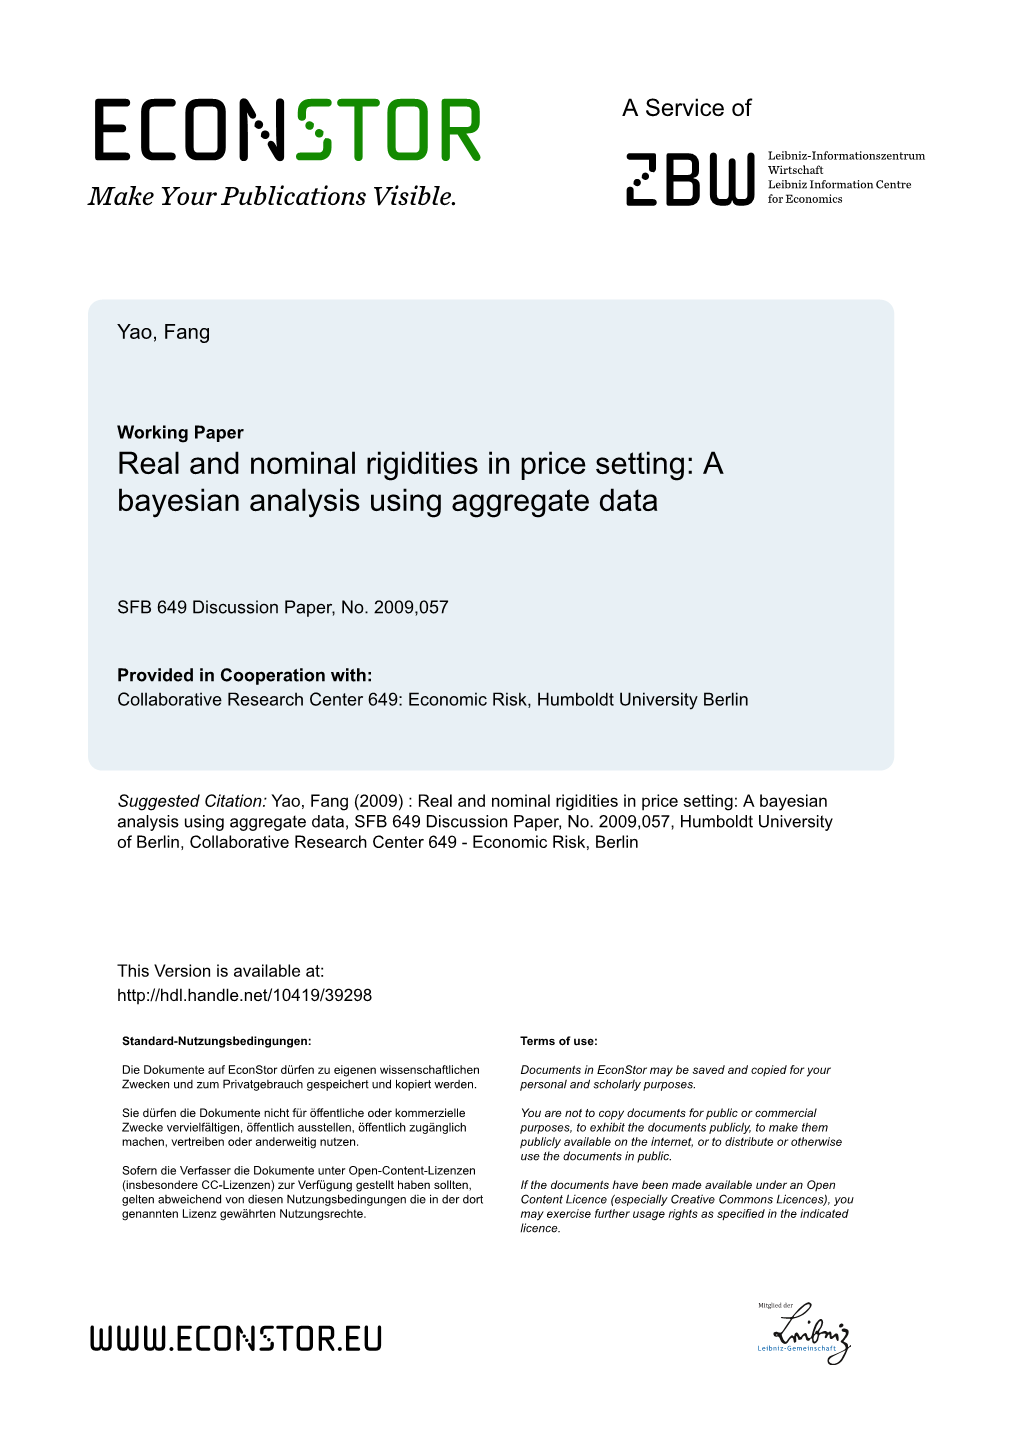 Real and Nominal Rigidities in Price Setting: a Bayesian Analysis Using Aggregate Data